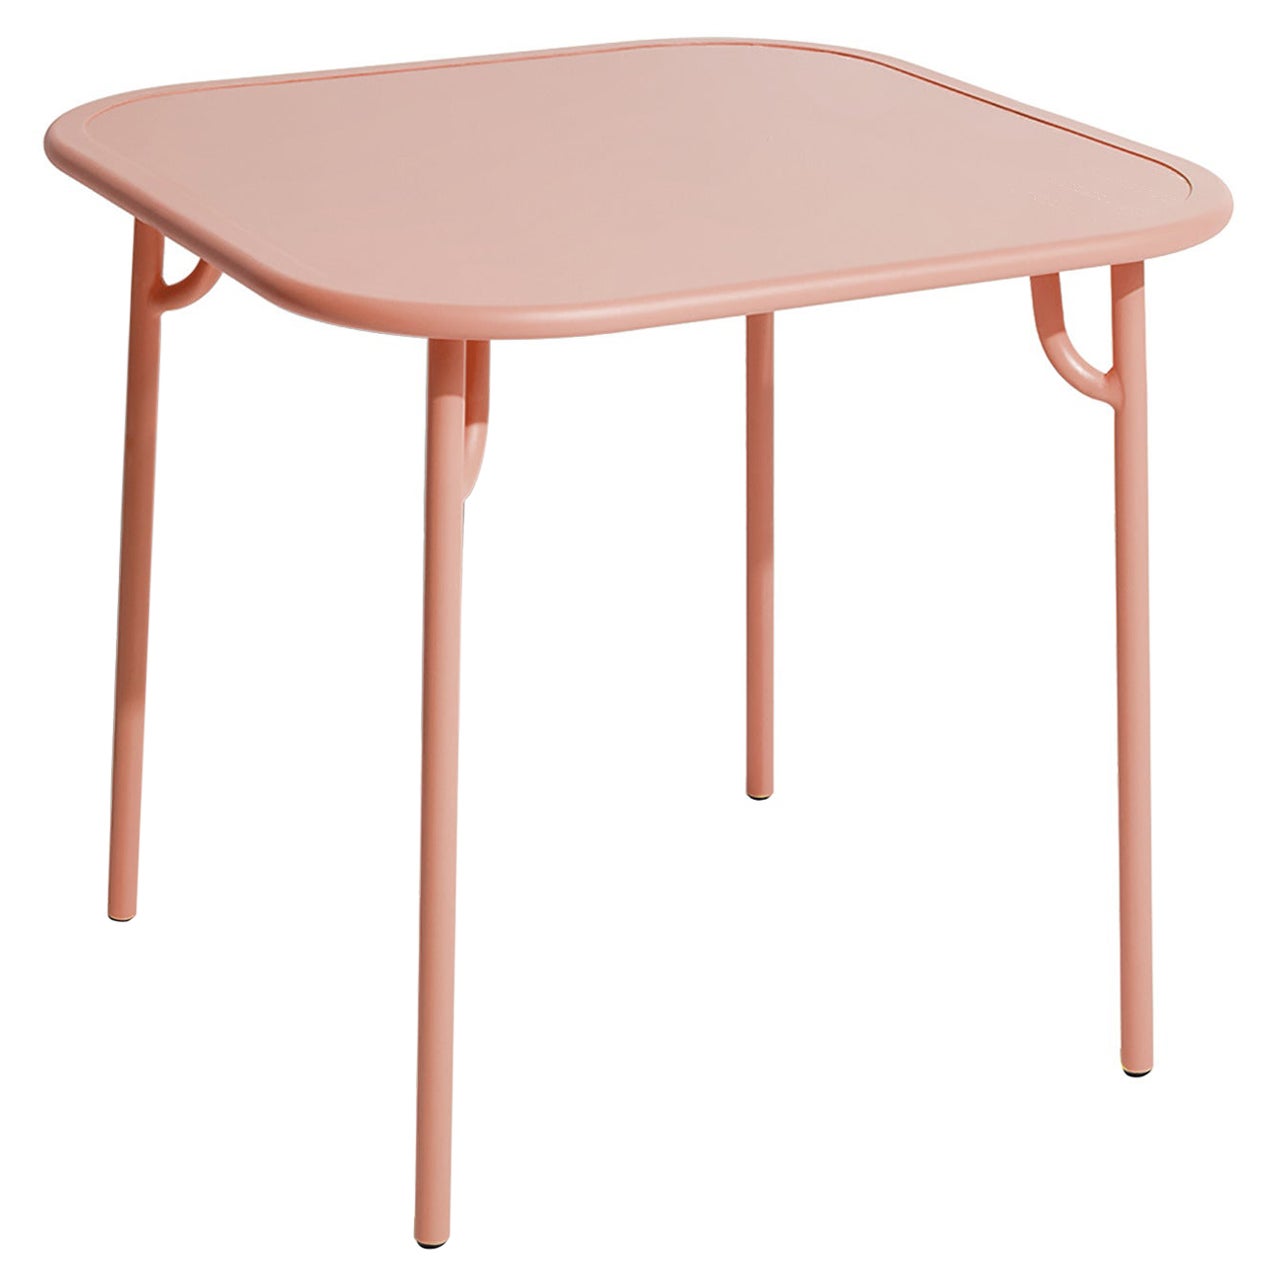 Petite Friture Week-End Plain Square Dining Table in Blush Aluminium, 2017 For Sale